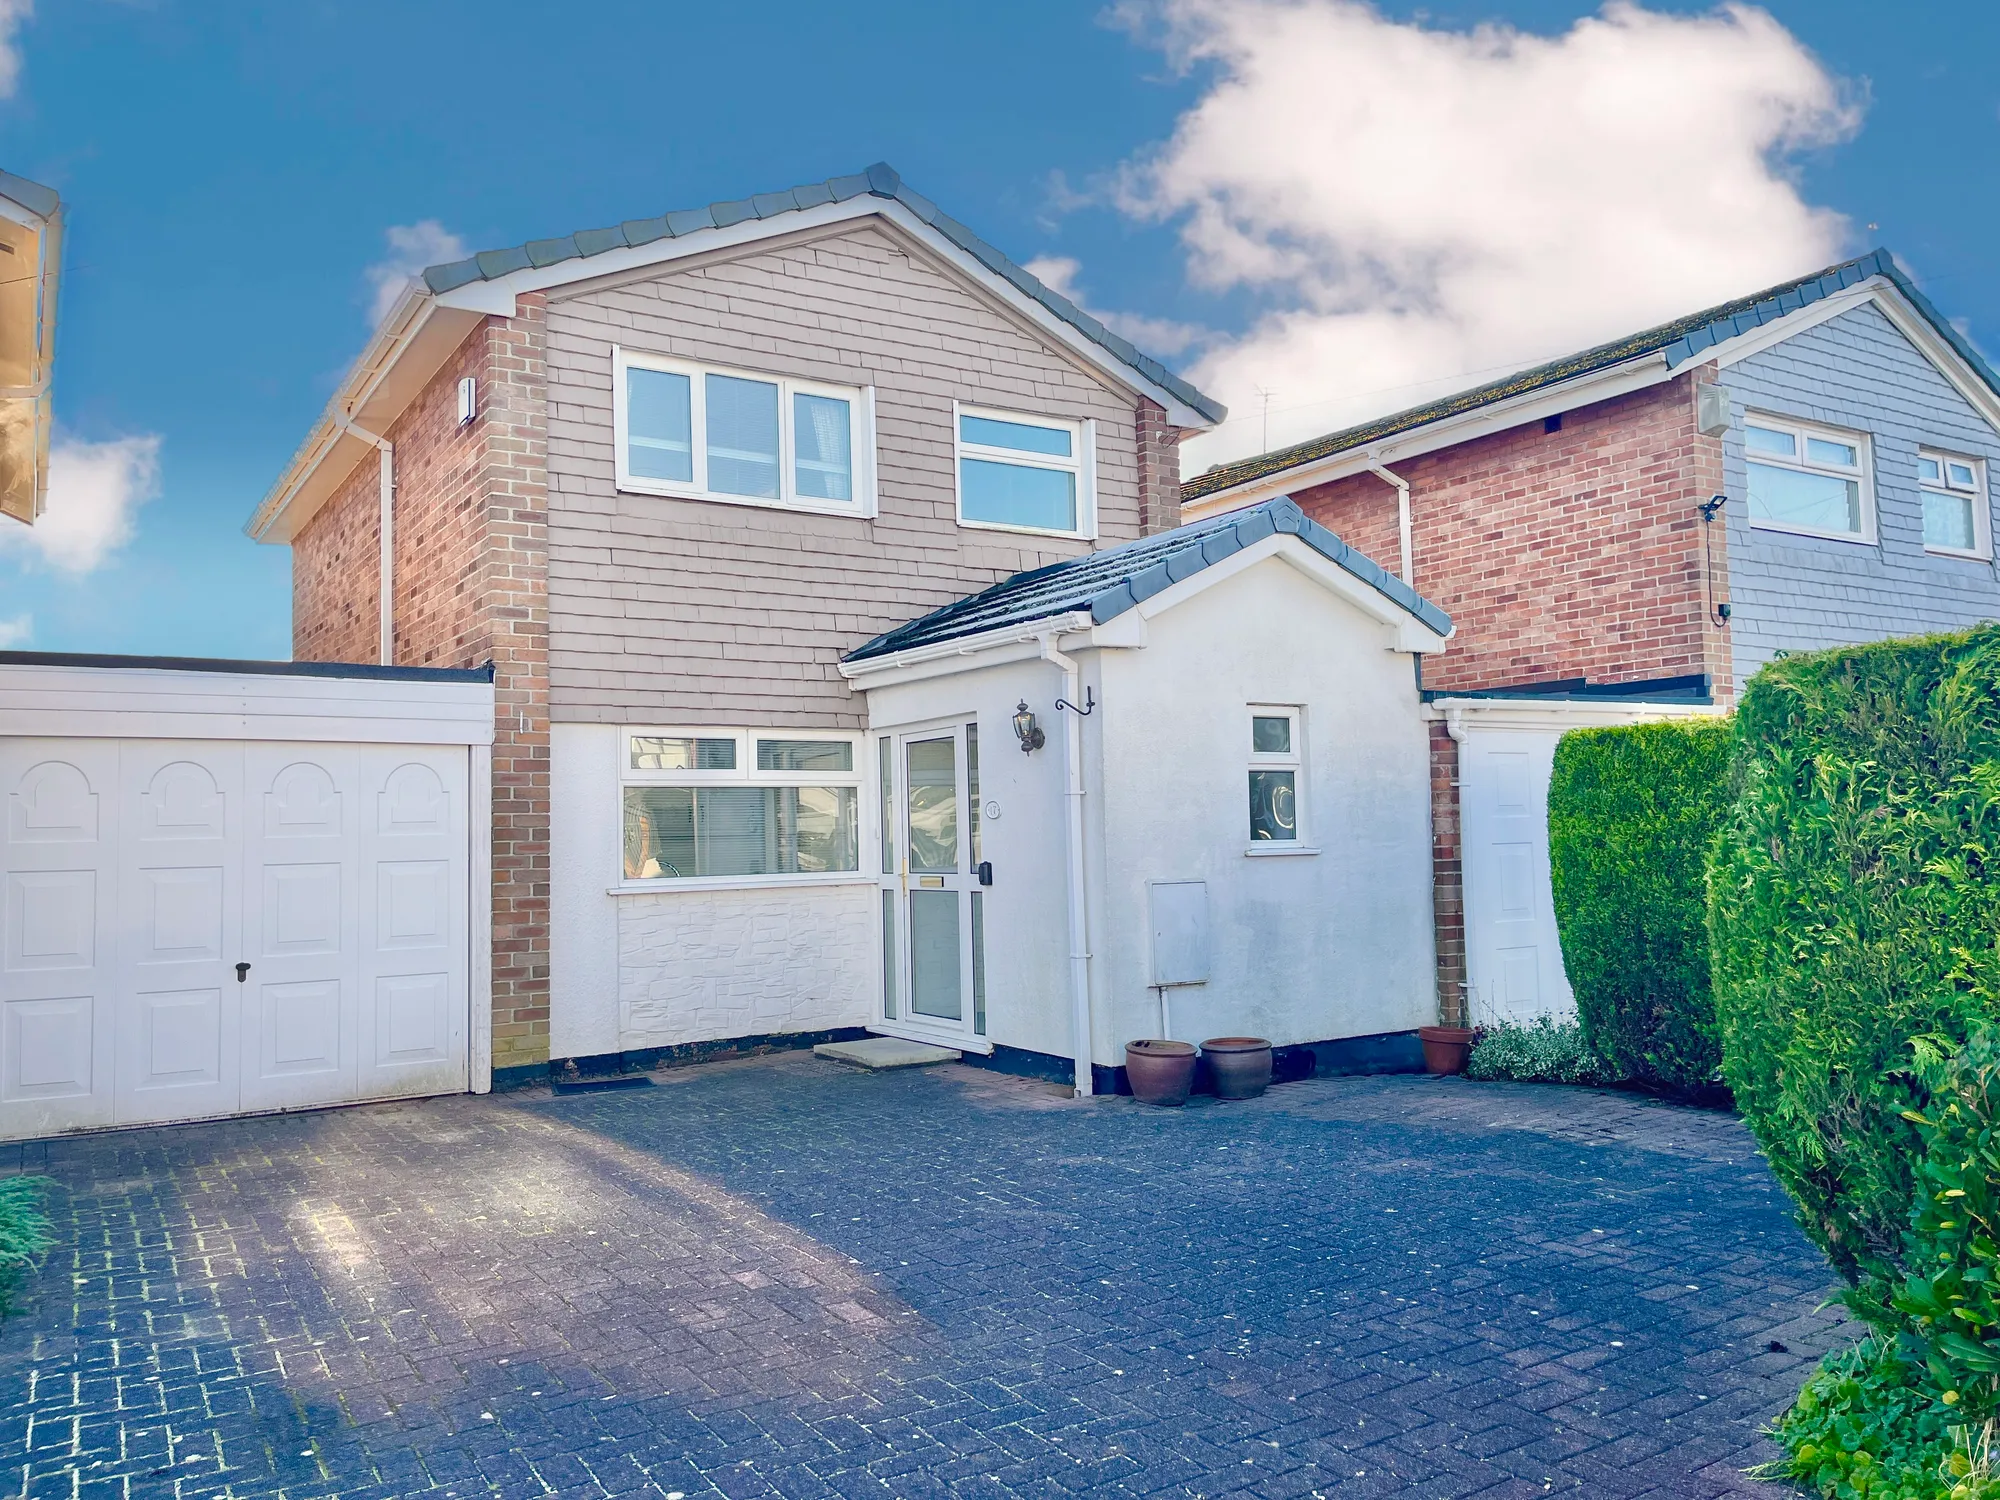 Check out the floorplan - what a space! Introducing this splendid three-bedroom link detached residence located in the highly coveted Briars Lane, Maghull. Boasting an enviable position within this sought-after locale, the property is ideally situated for renowned schools and transport links.